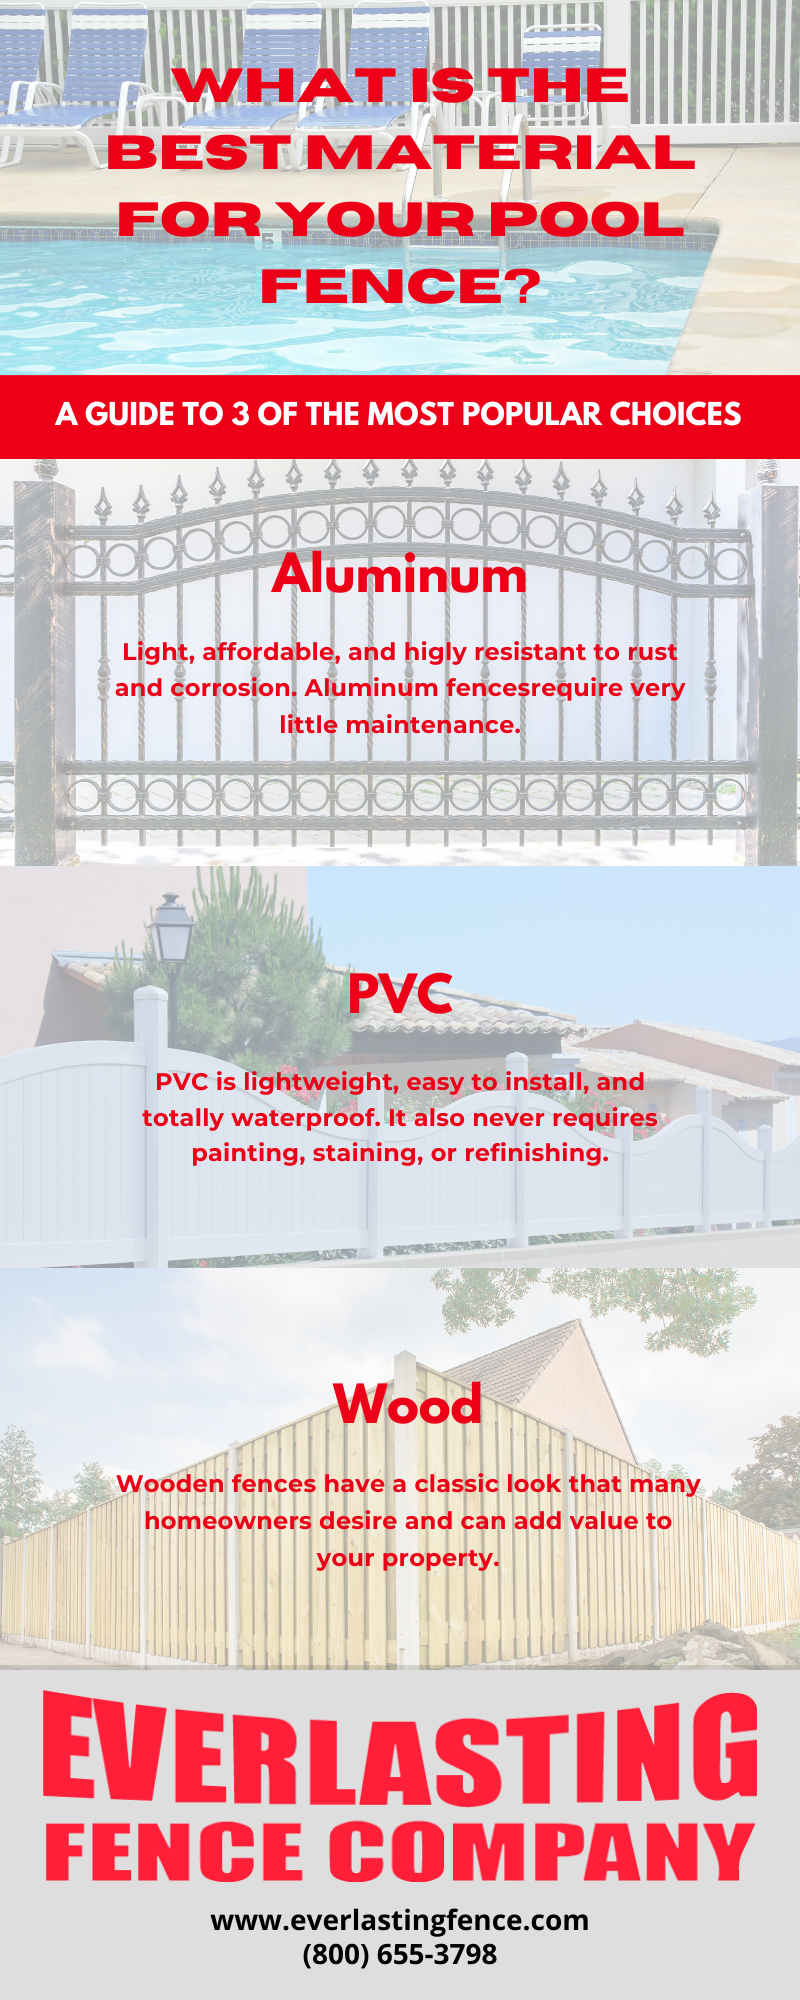 infographic describing the benefits of different materials for pool fences